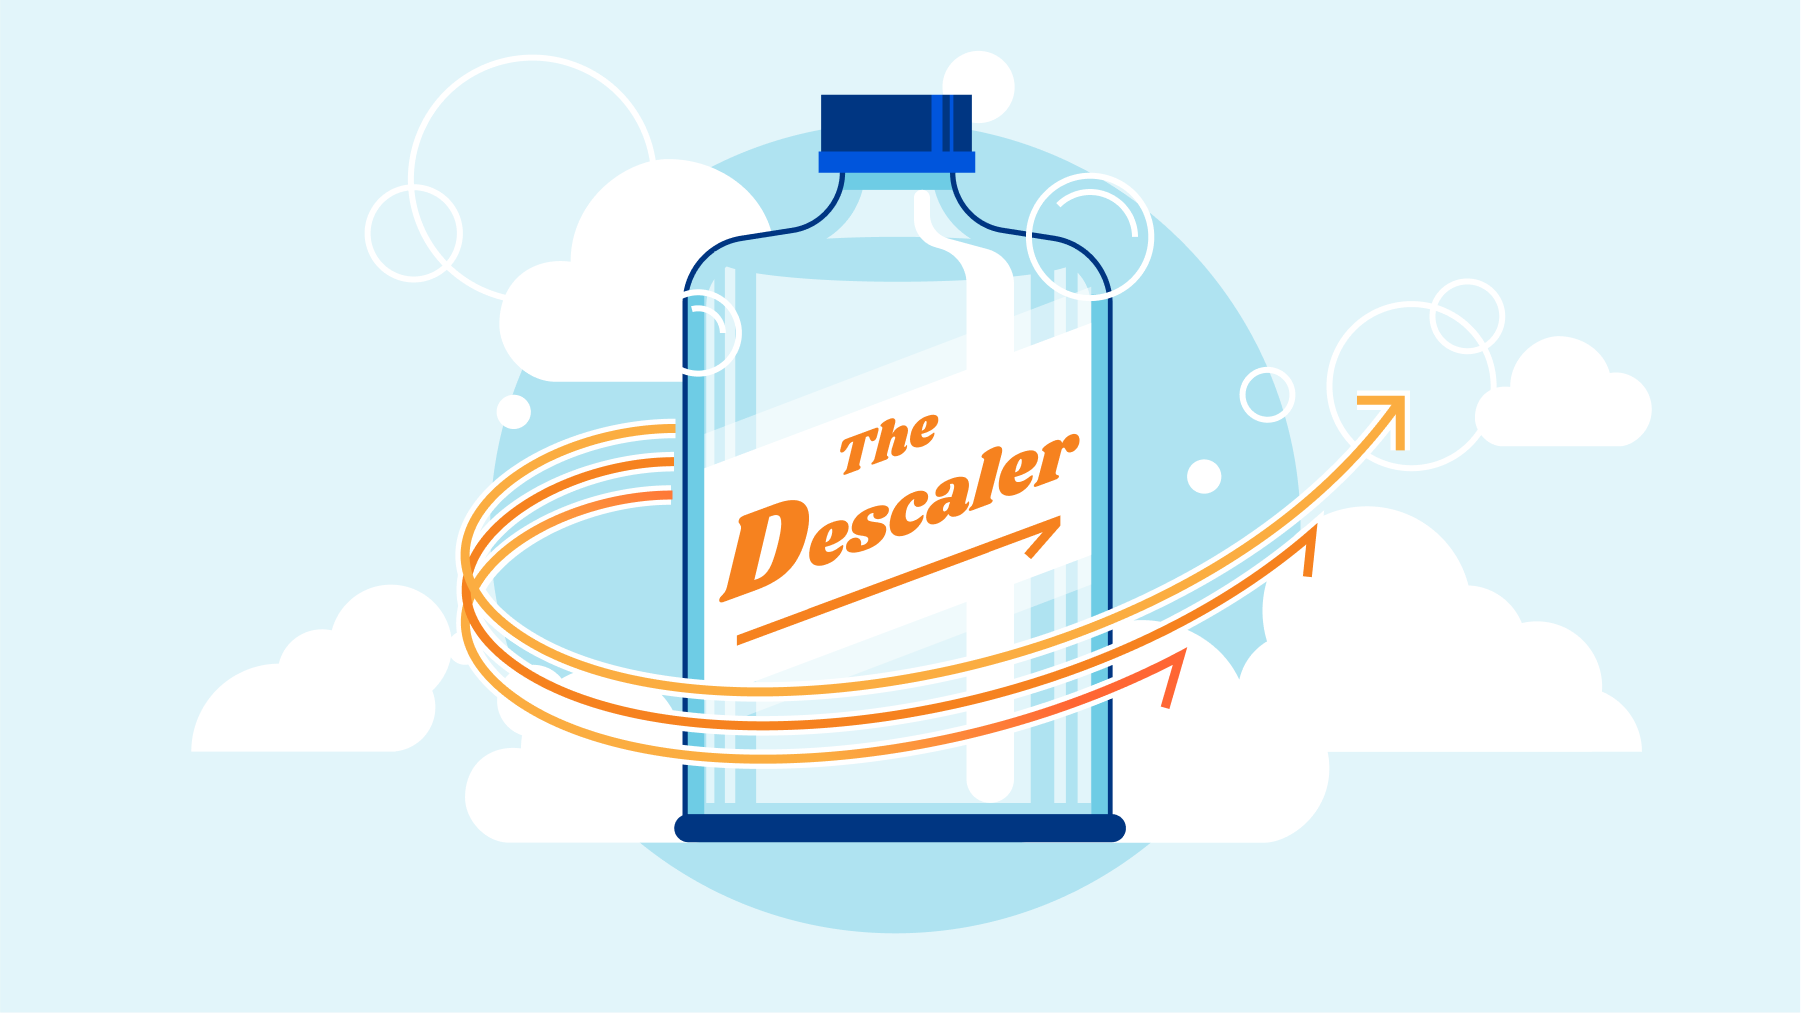 No hassle migration from Zscaler to Cloudflare One with The Descaler Program